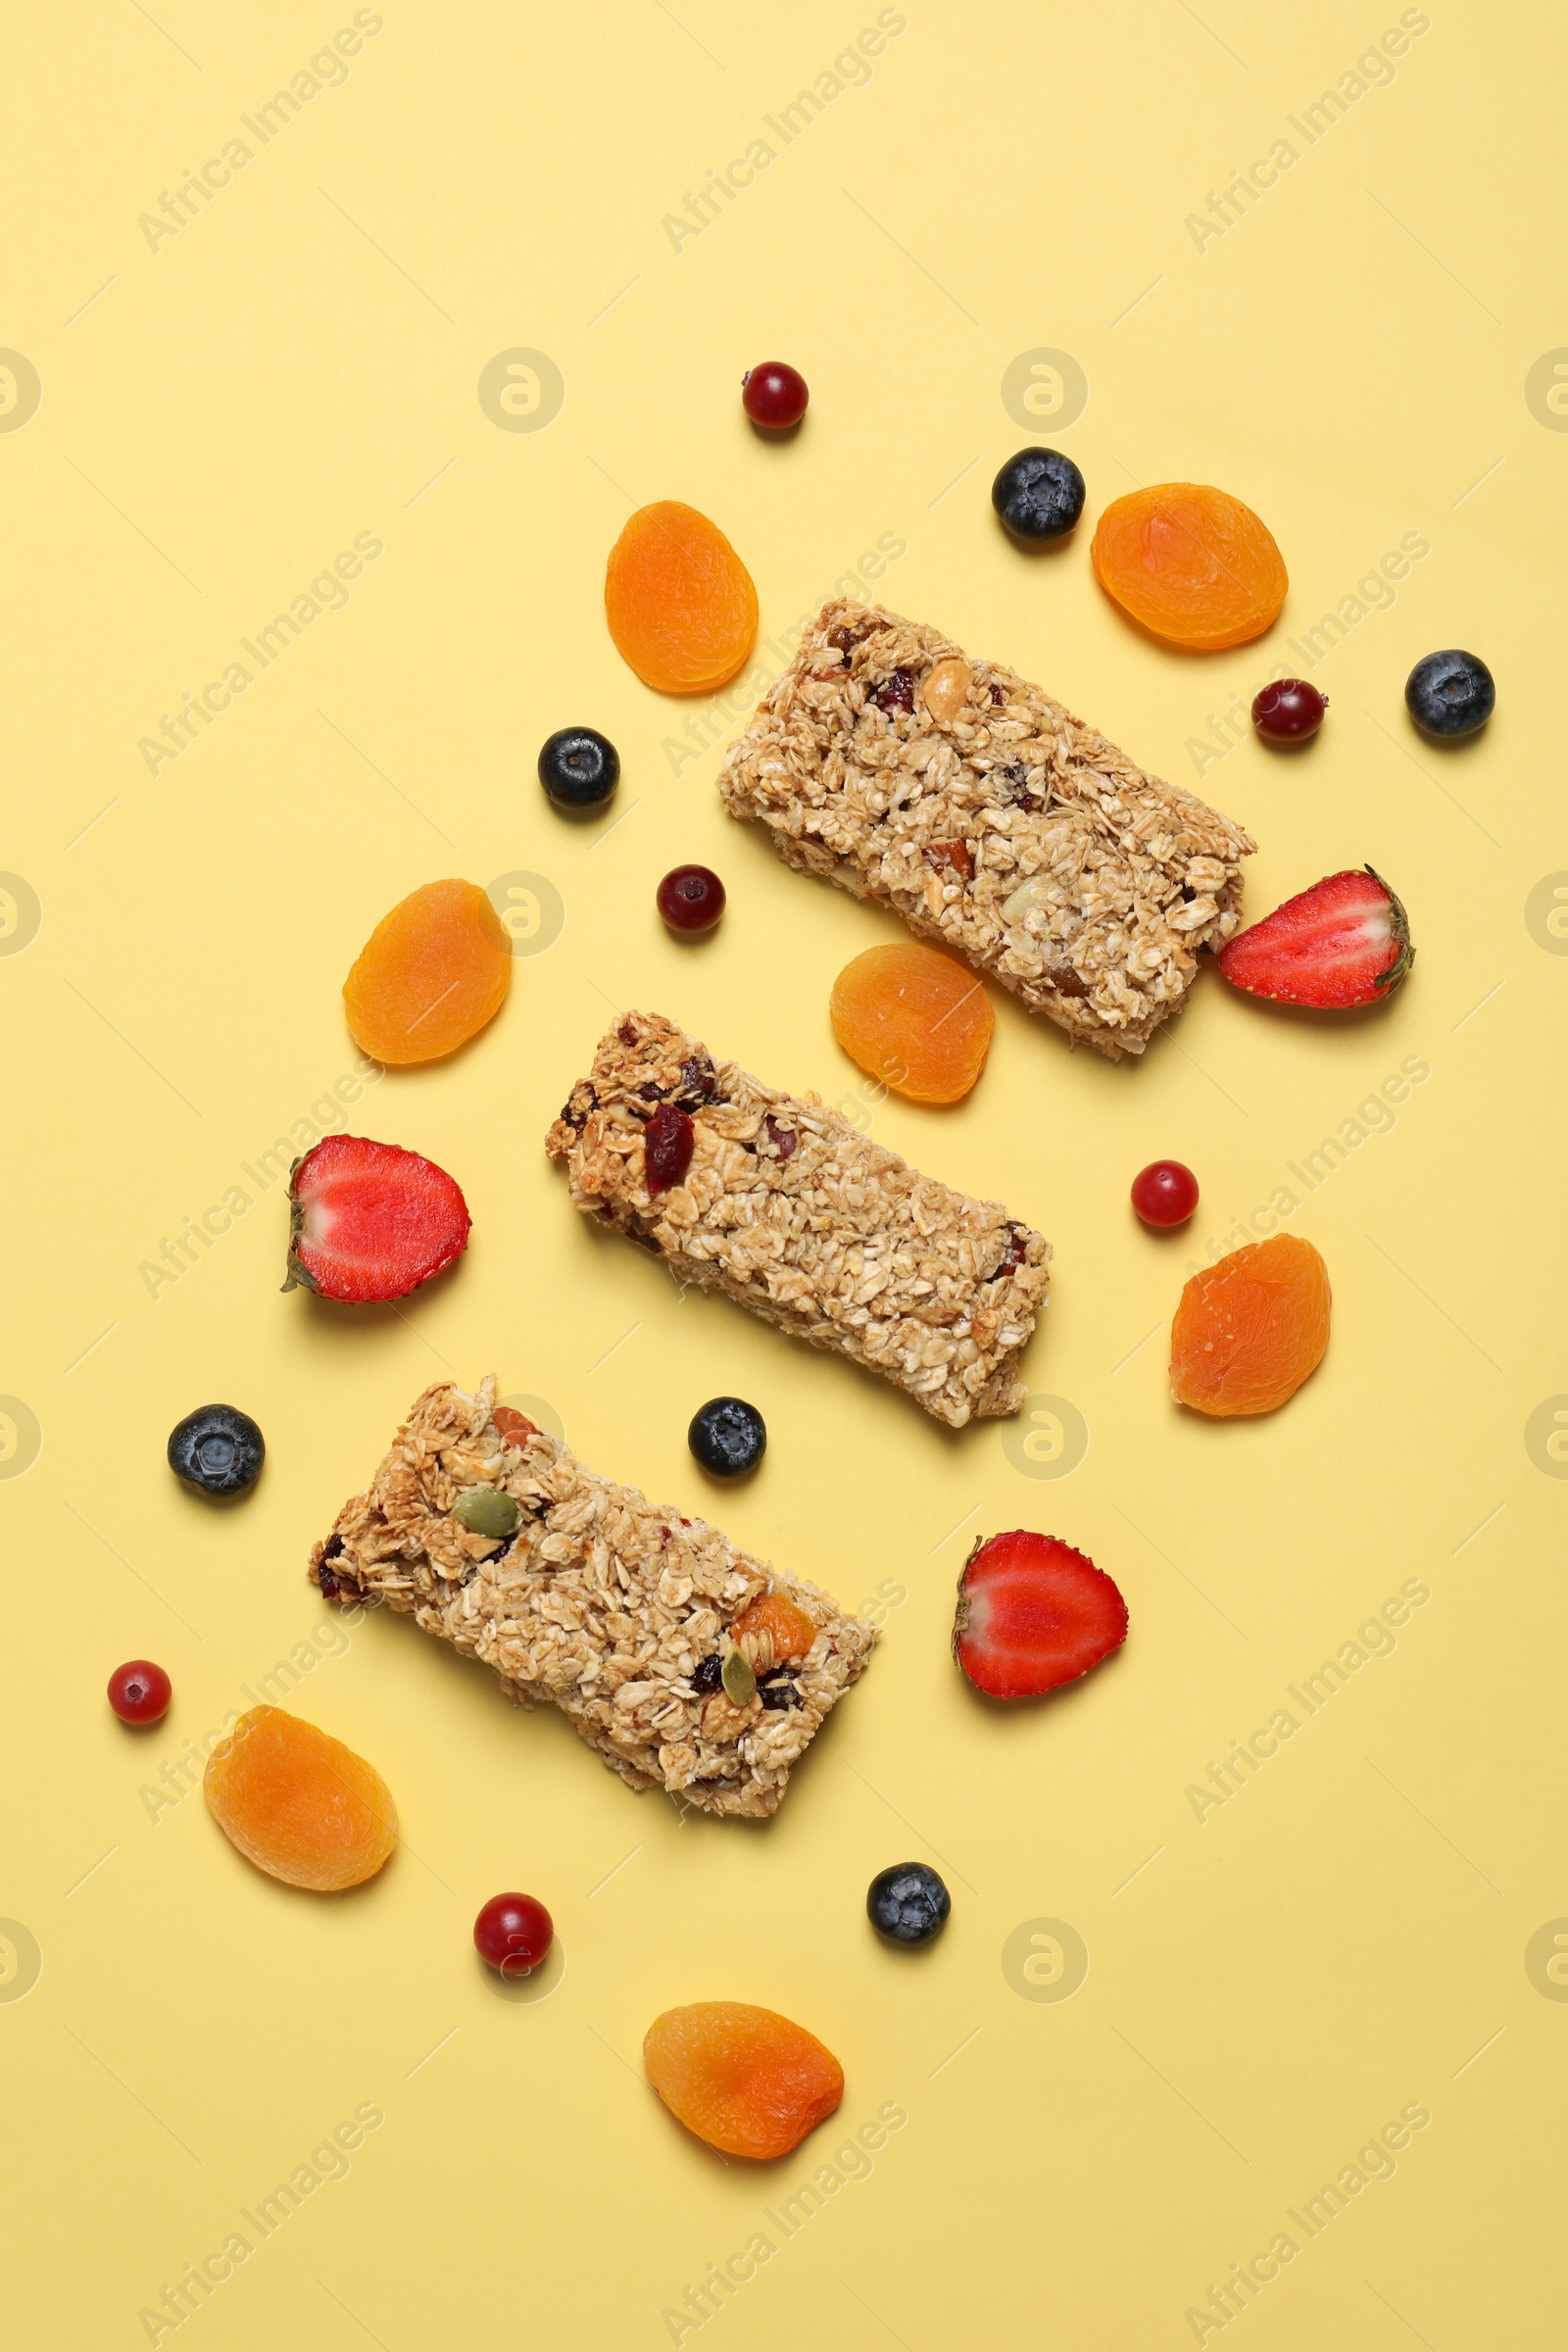 Photo of Tasty granola bars and fruits on yellow background, flat lay